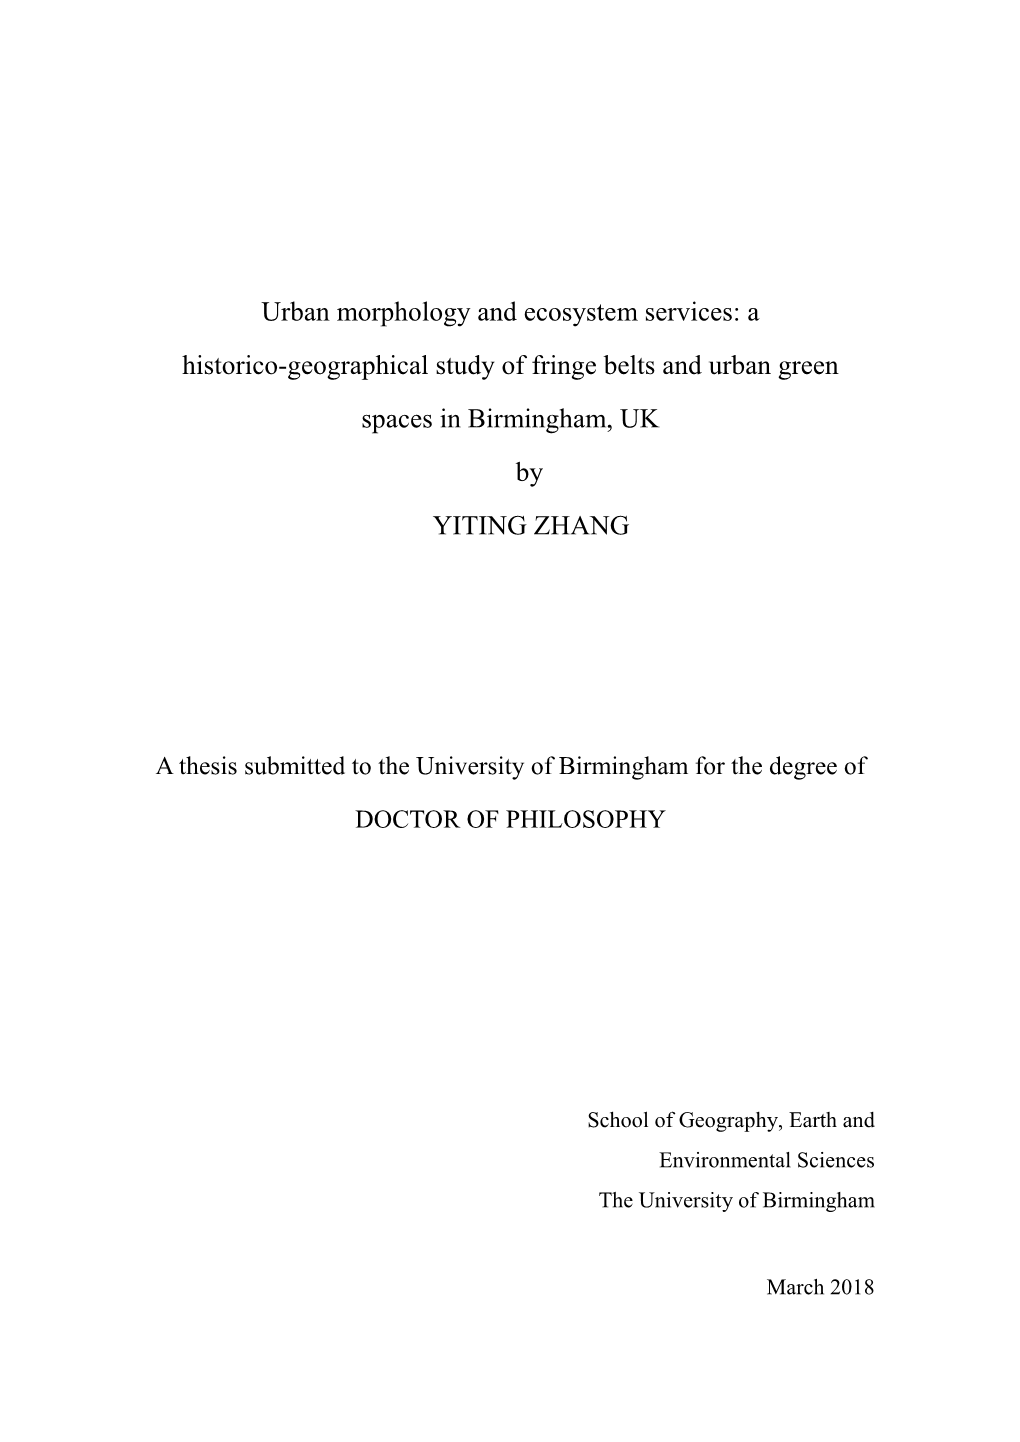 Urban Morphology and Ecosystem Services: a Historico-Geographical Study of Fringe Belts and Urban Green Spaces in Birmingham, UK by YITING ZHANG